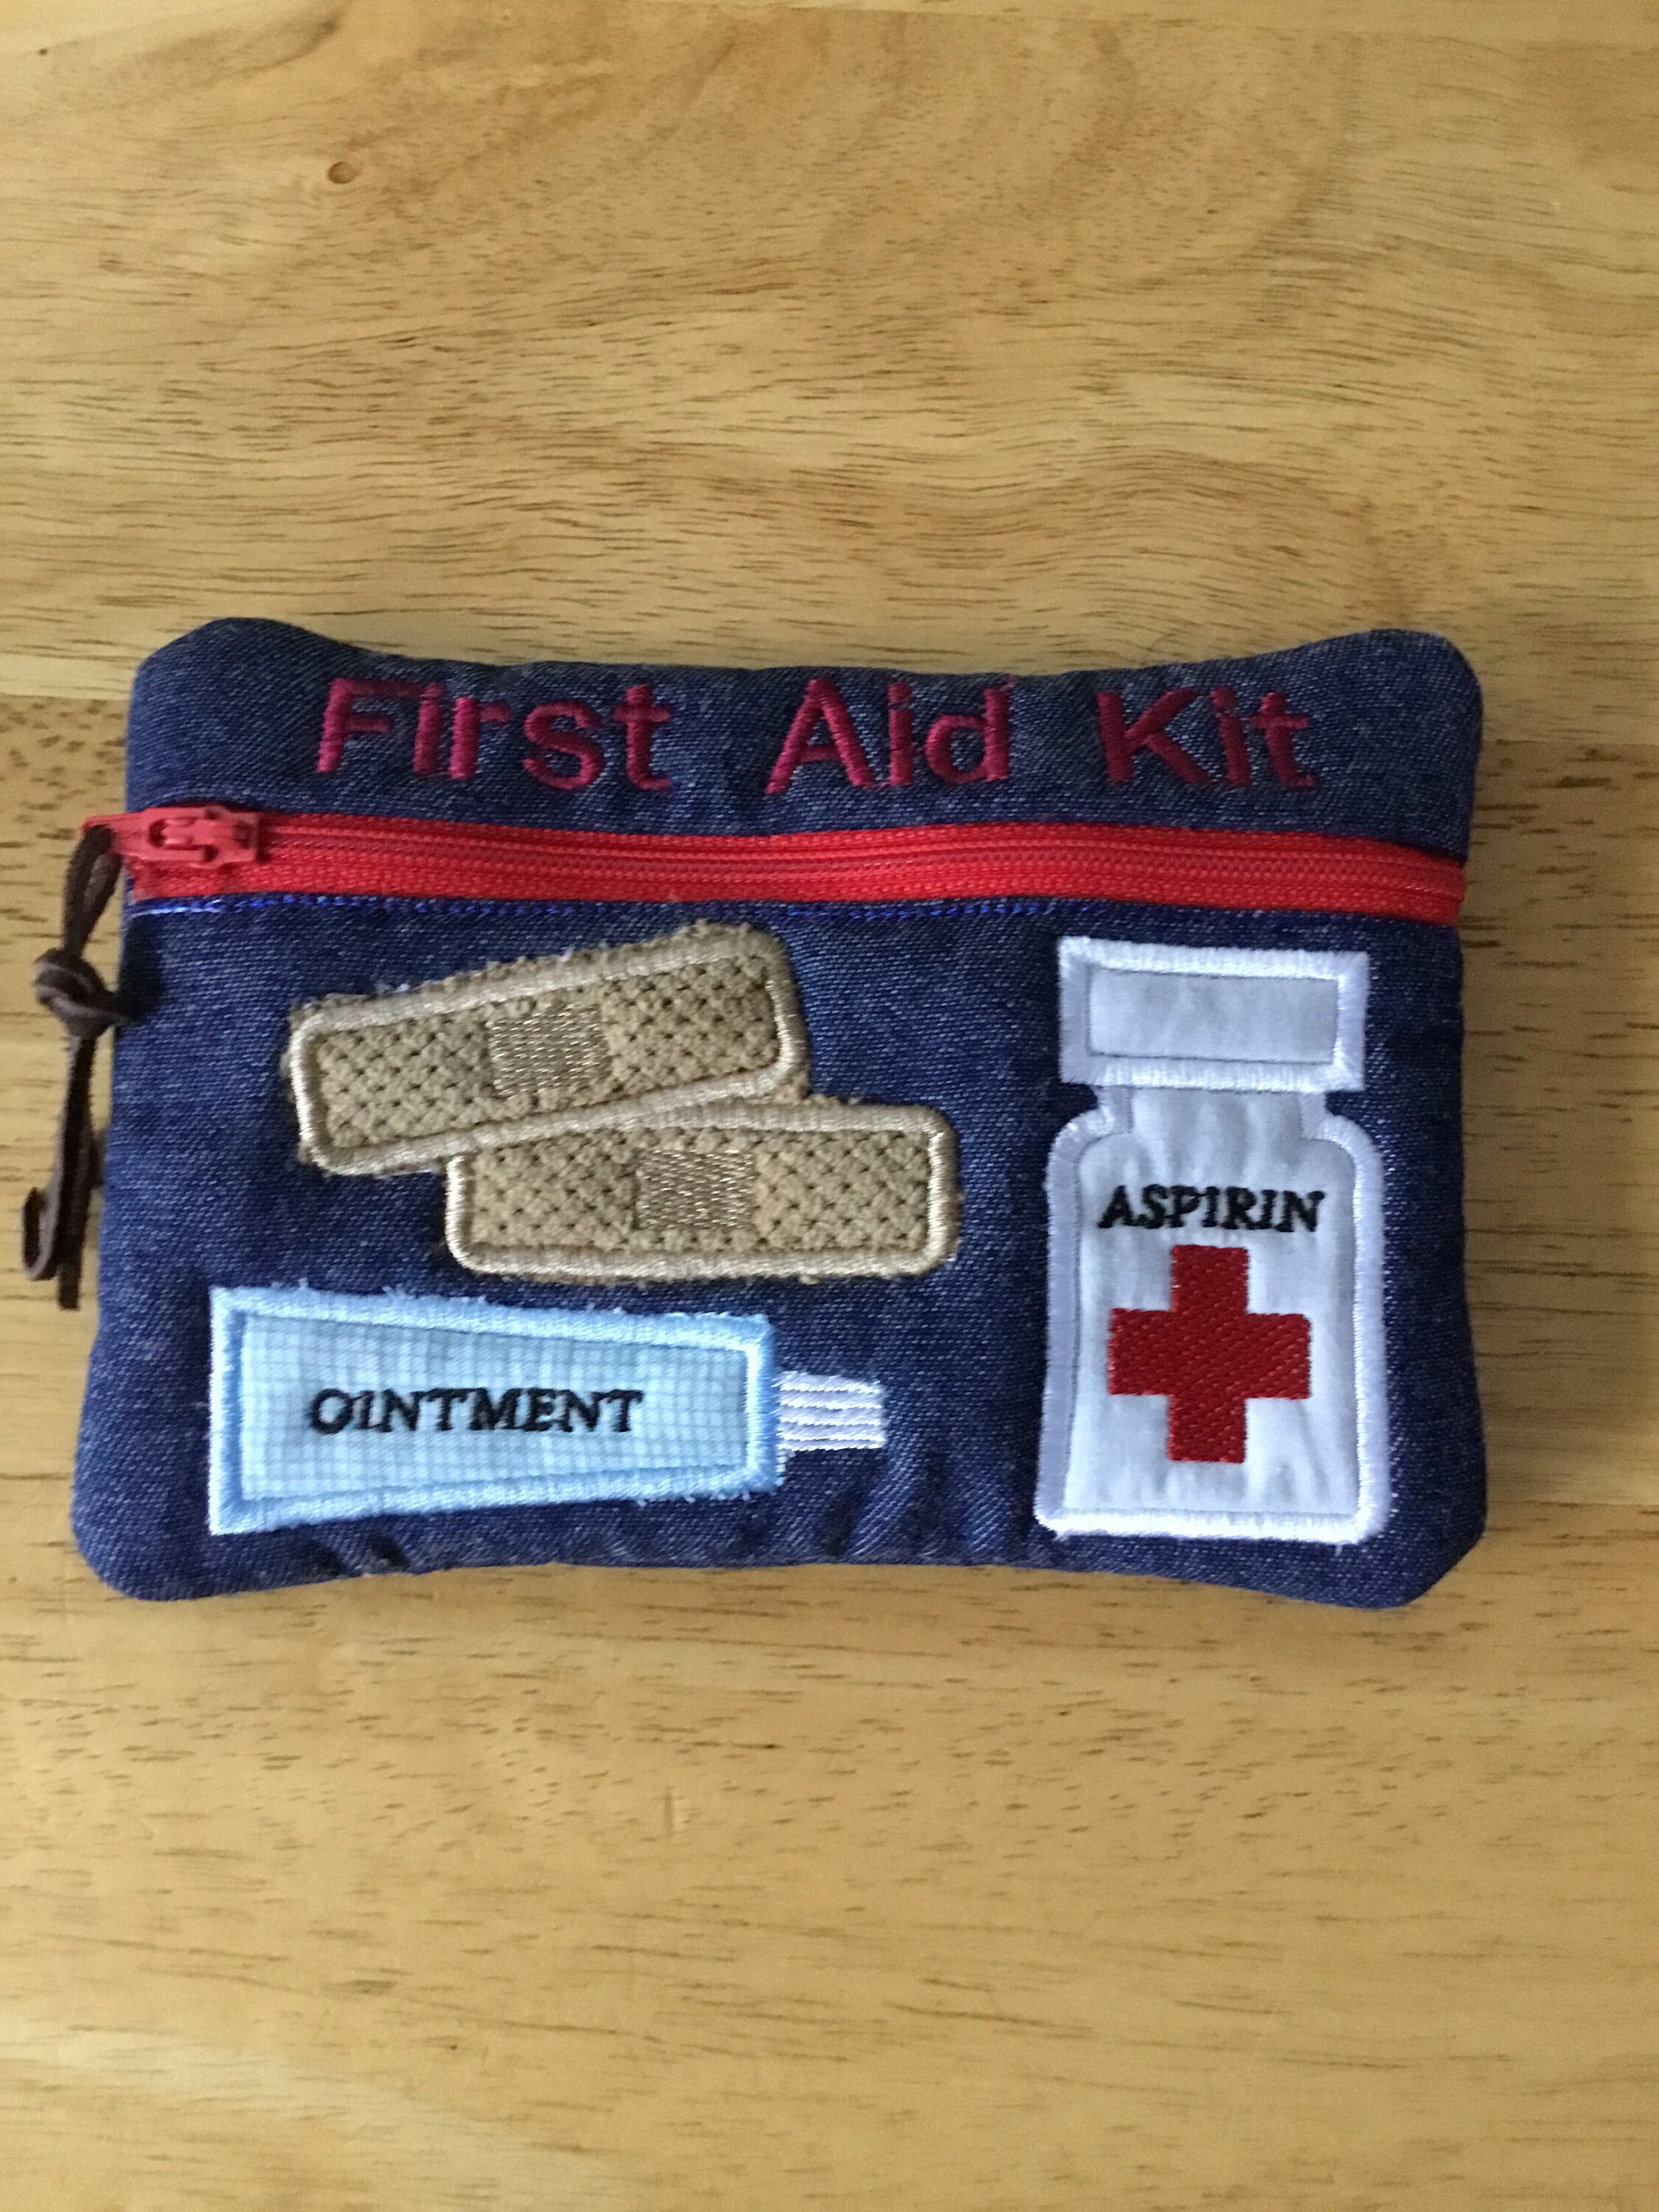  NUOBESTY hand first aid kit emergency bag toiletry bag